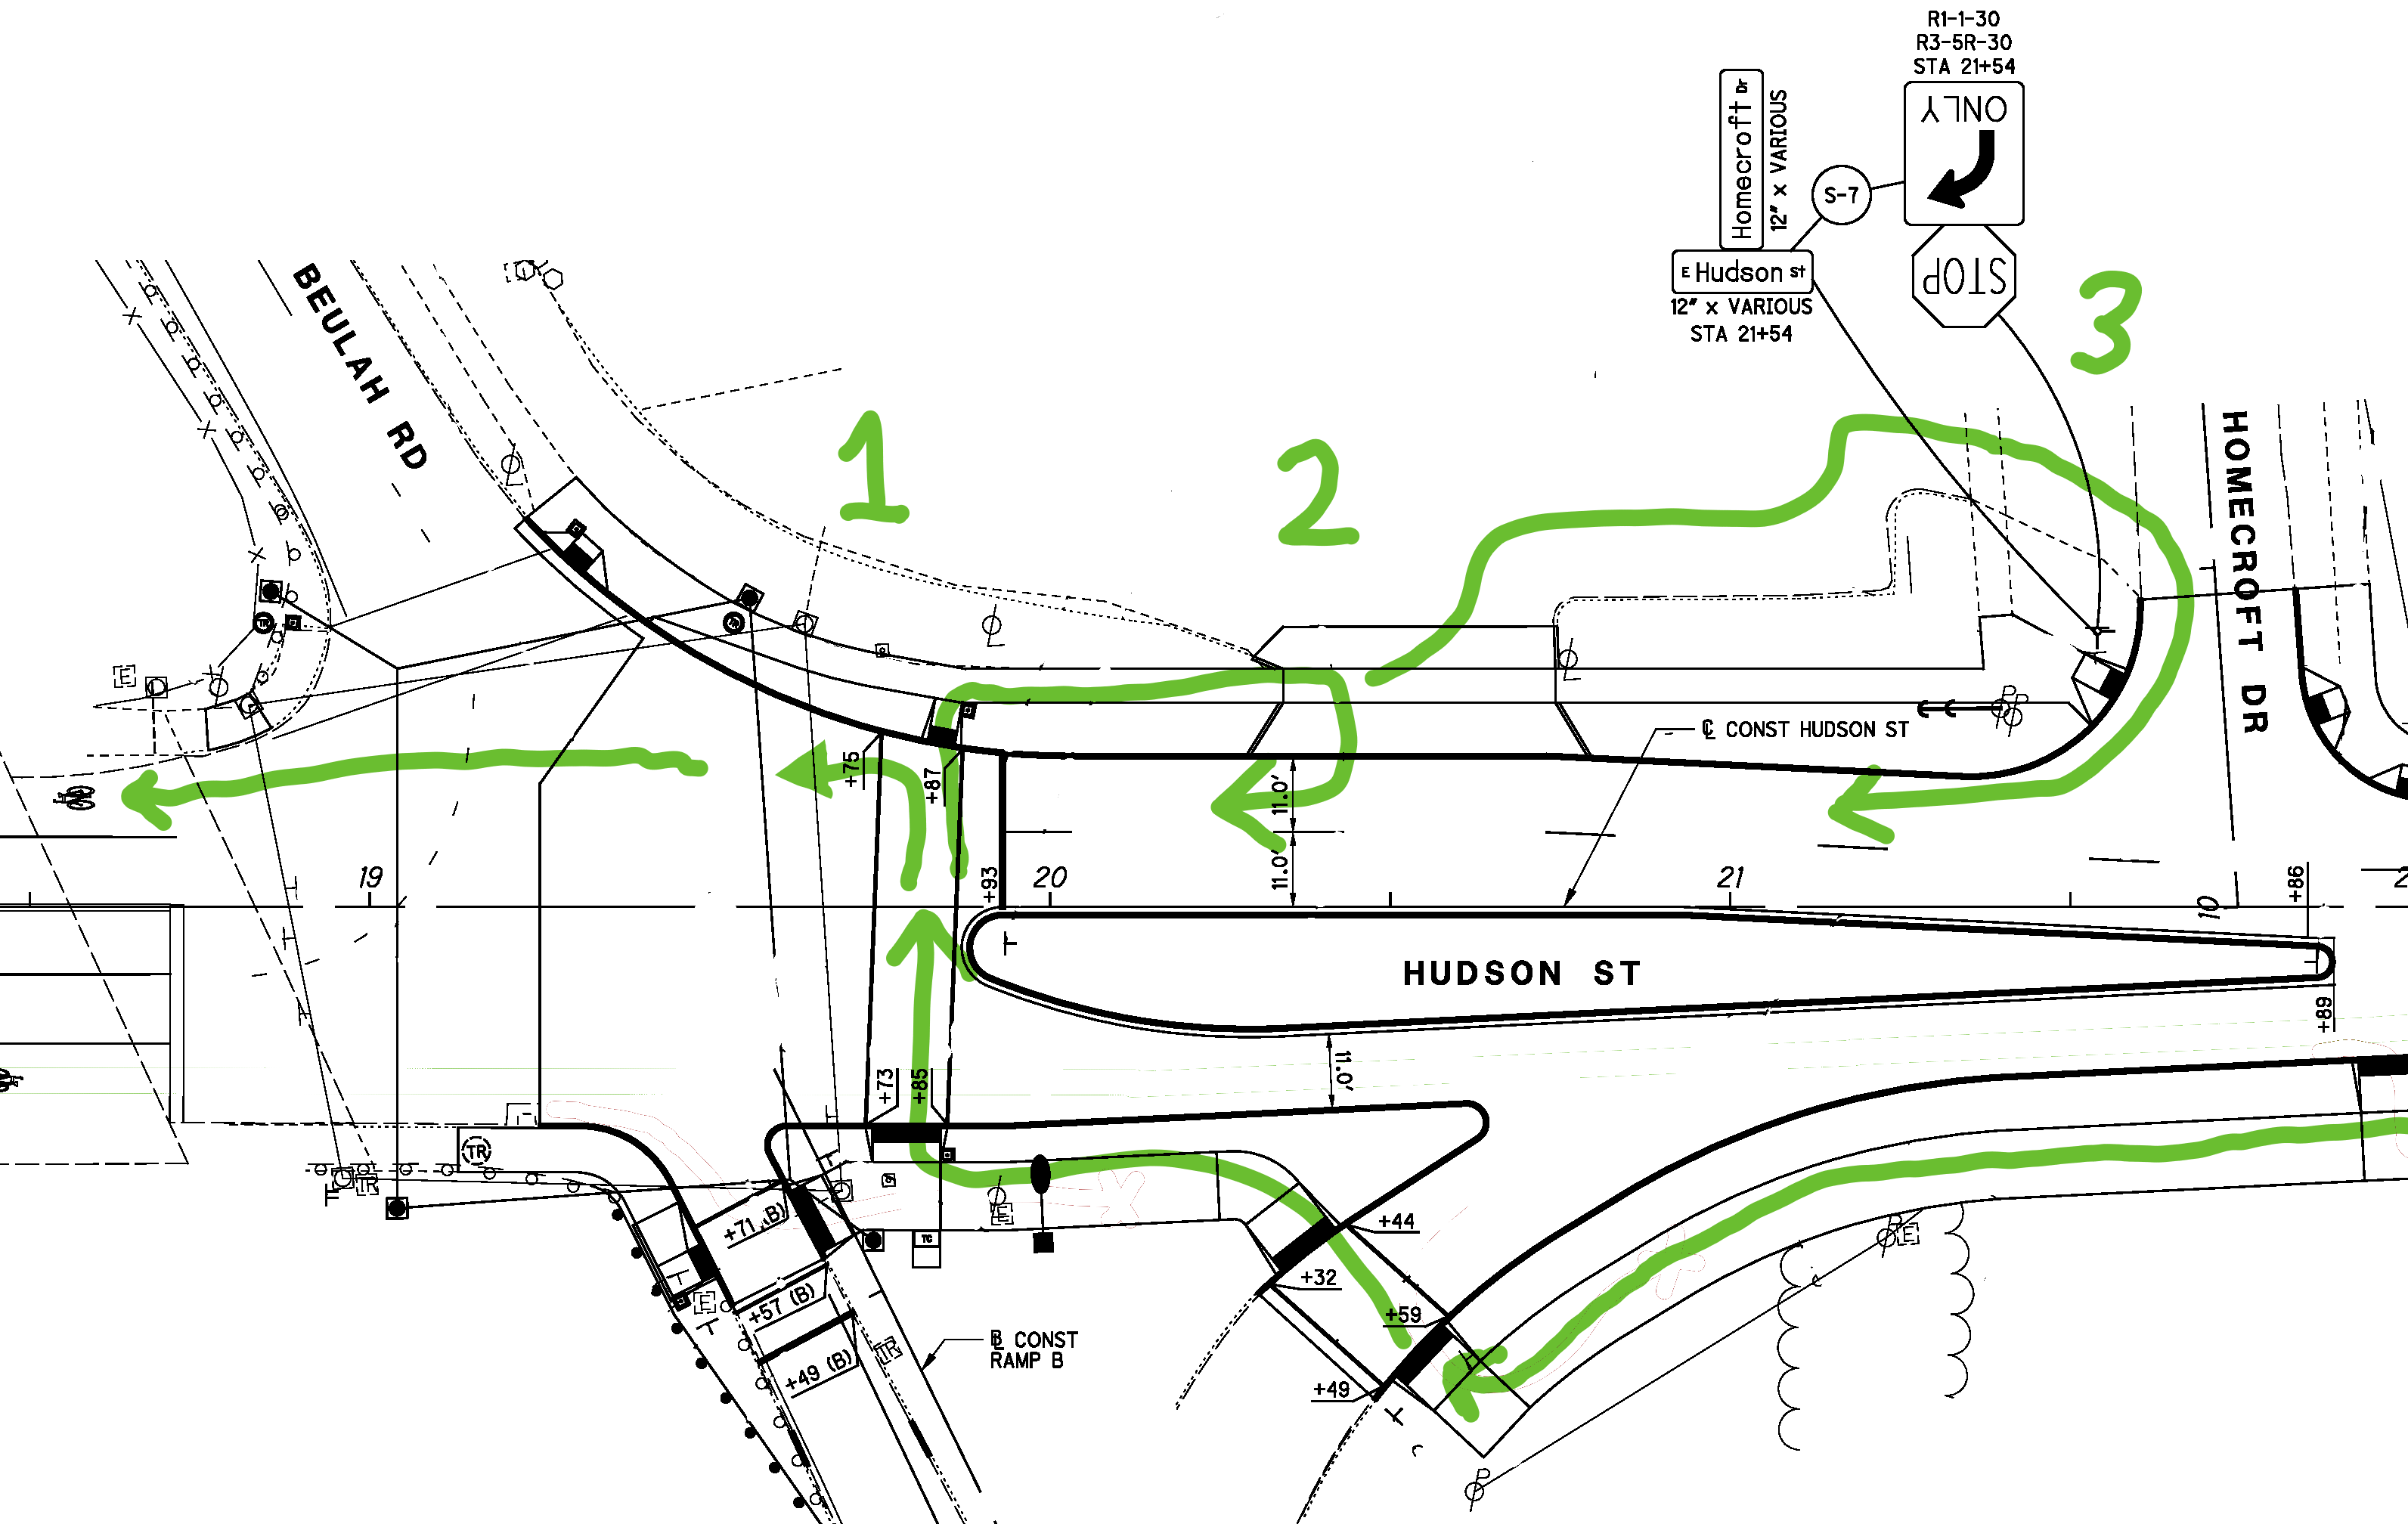 A bike path through the intersection is drawn in green. The path starts on the shared-use path, crosses Hudson at the crosswalk, and then uses three different strategies, detailed below, to head west.